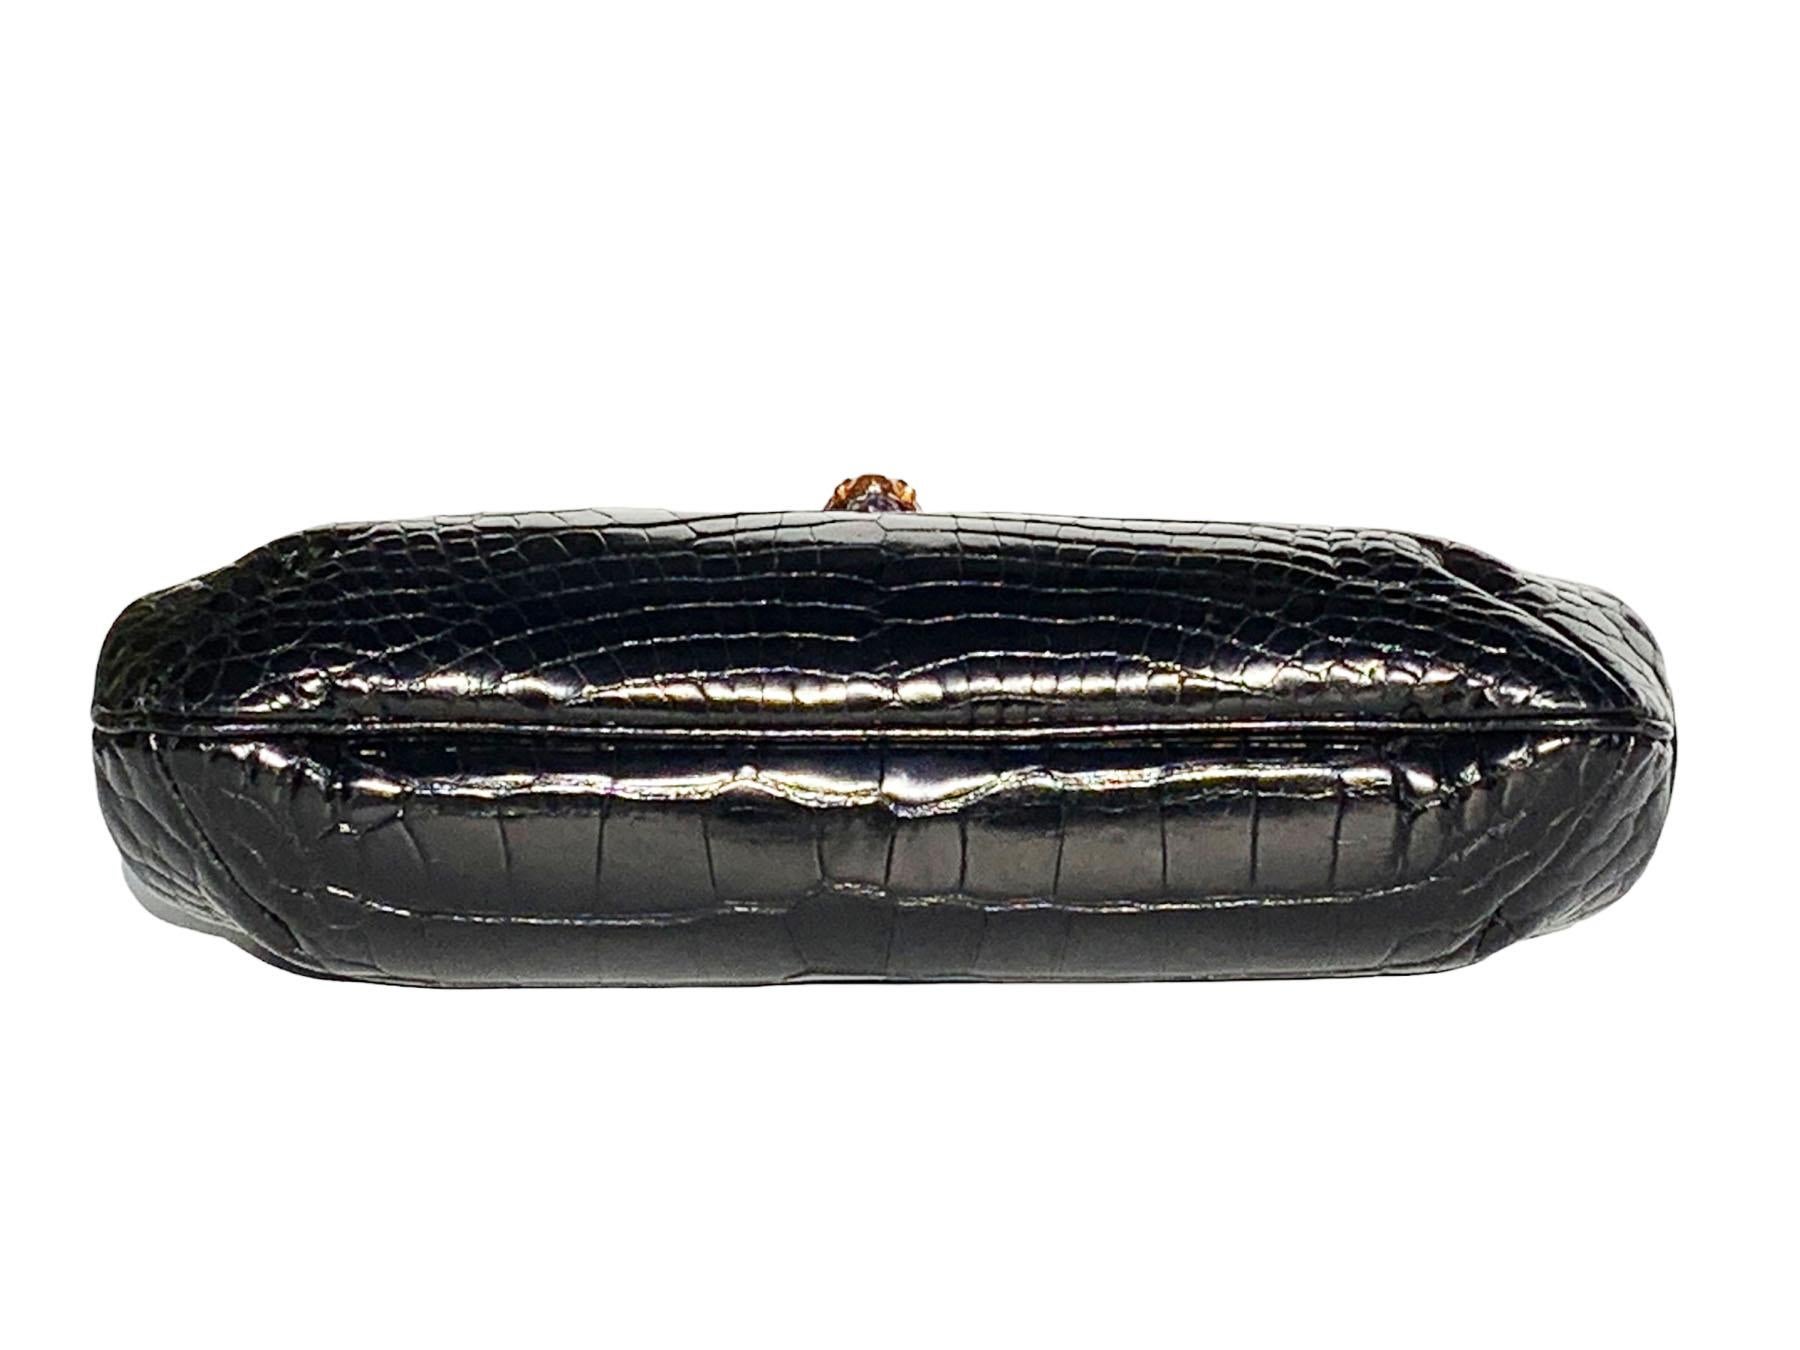 Women's New Tom Ford for Gucci S/S 2004 Limited Edition Black Crocodile Enamel Snake Bag For Sale